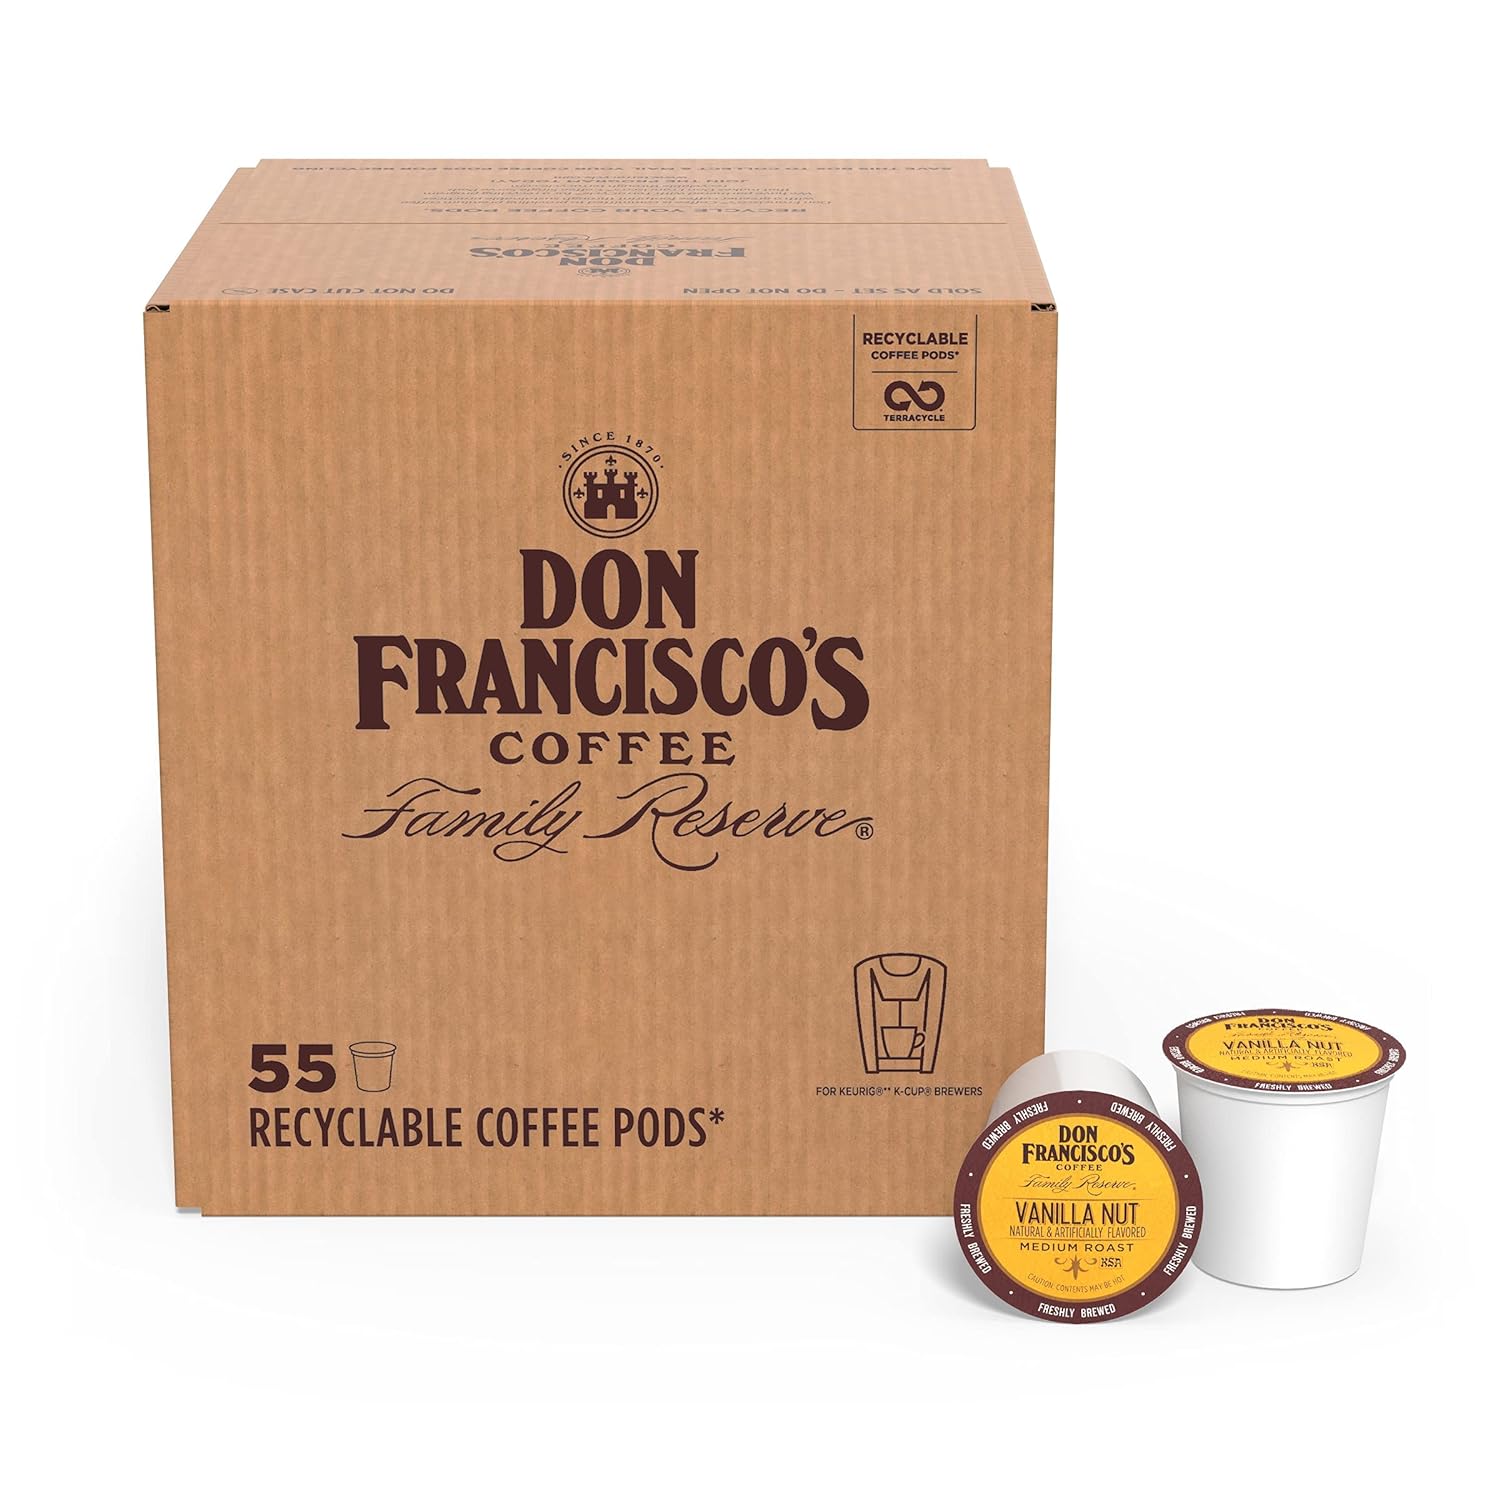 Don Francisco's Vanilla Nut Flavored Medium Roast Coffee Pods - 55 Count - Recyclable Single-Serve Coffee Pods, Compatible with your K- Cup Keurig Coffee Maker